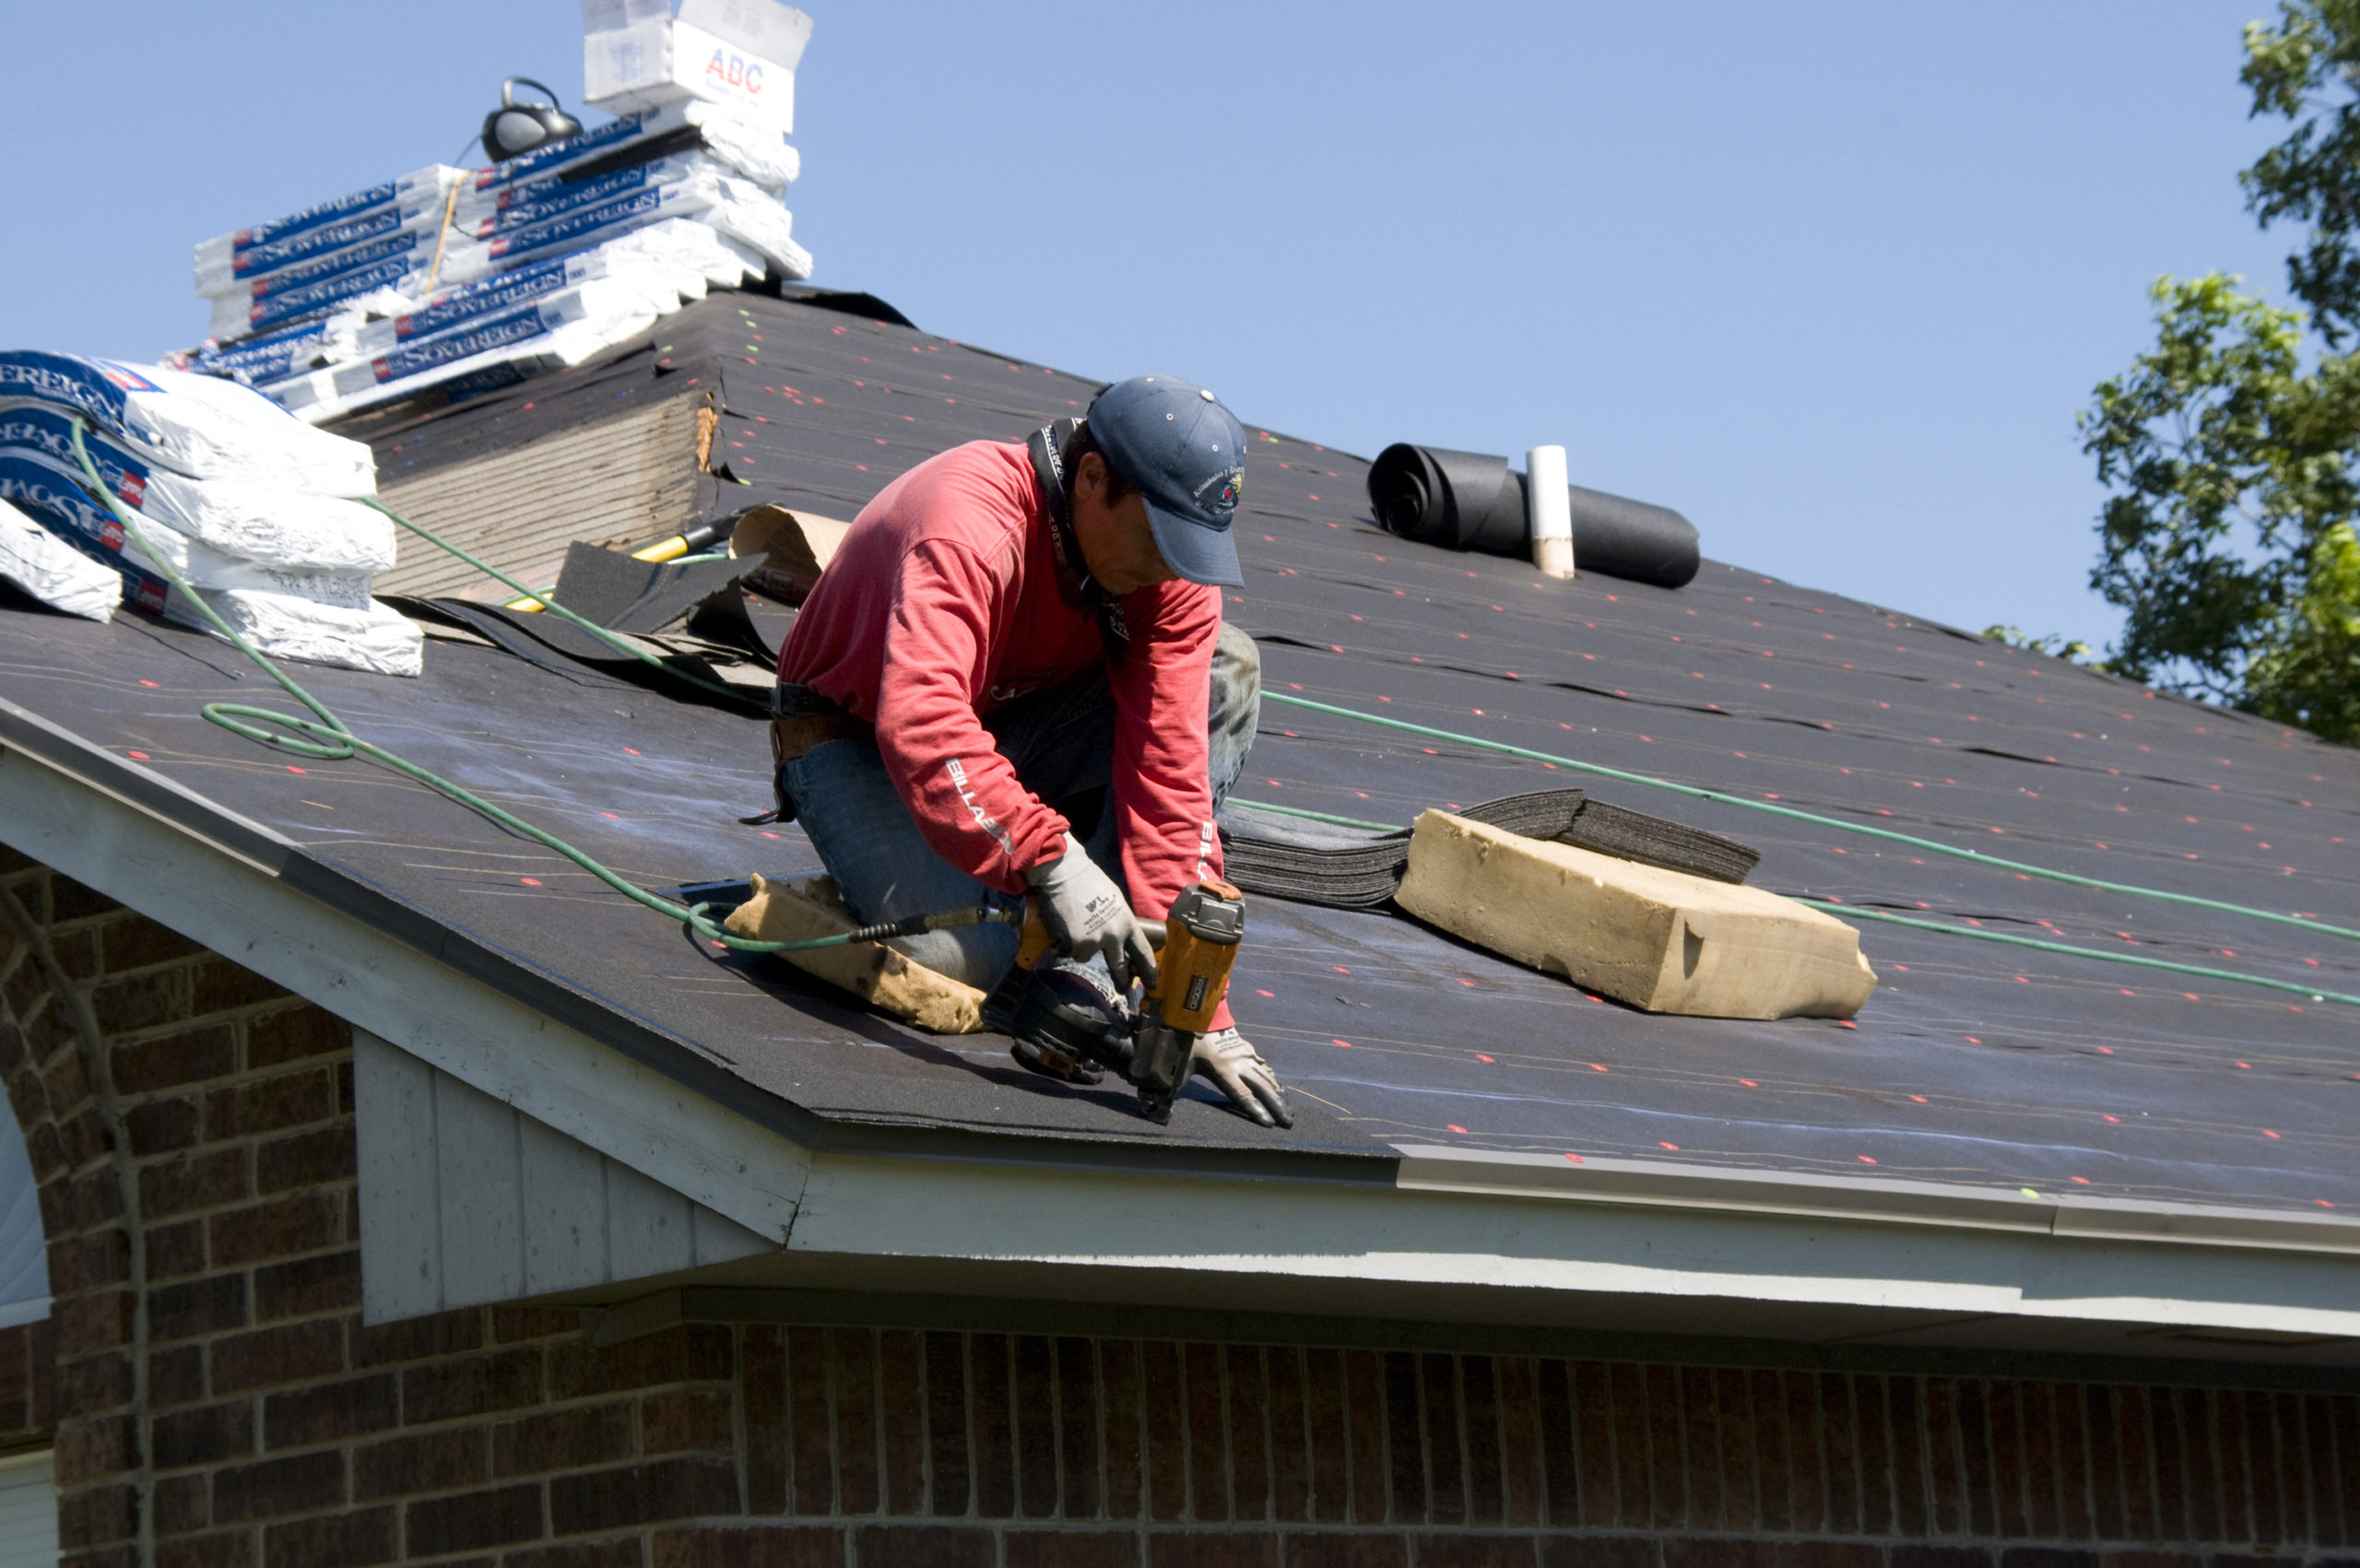 What Are The Best Ways To Pick And Choose A Roofing Company?